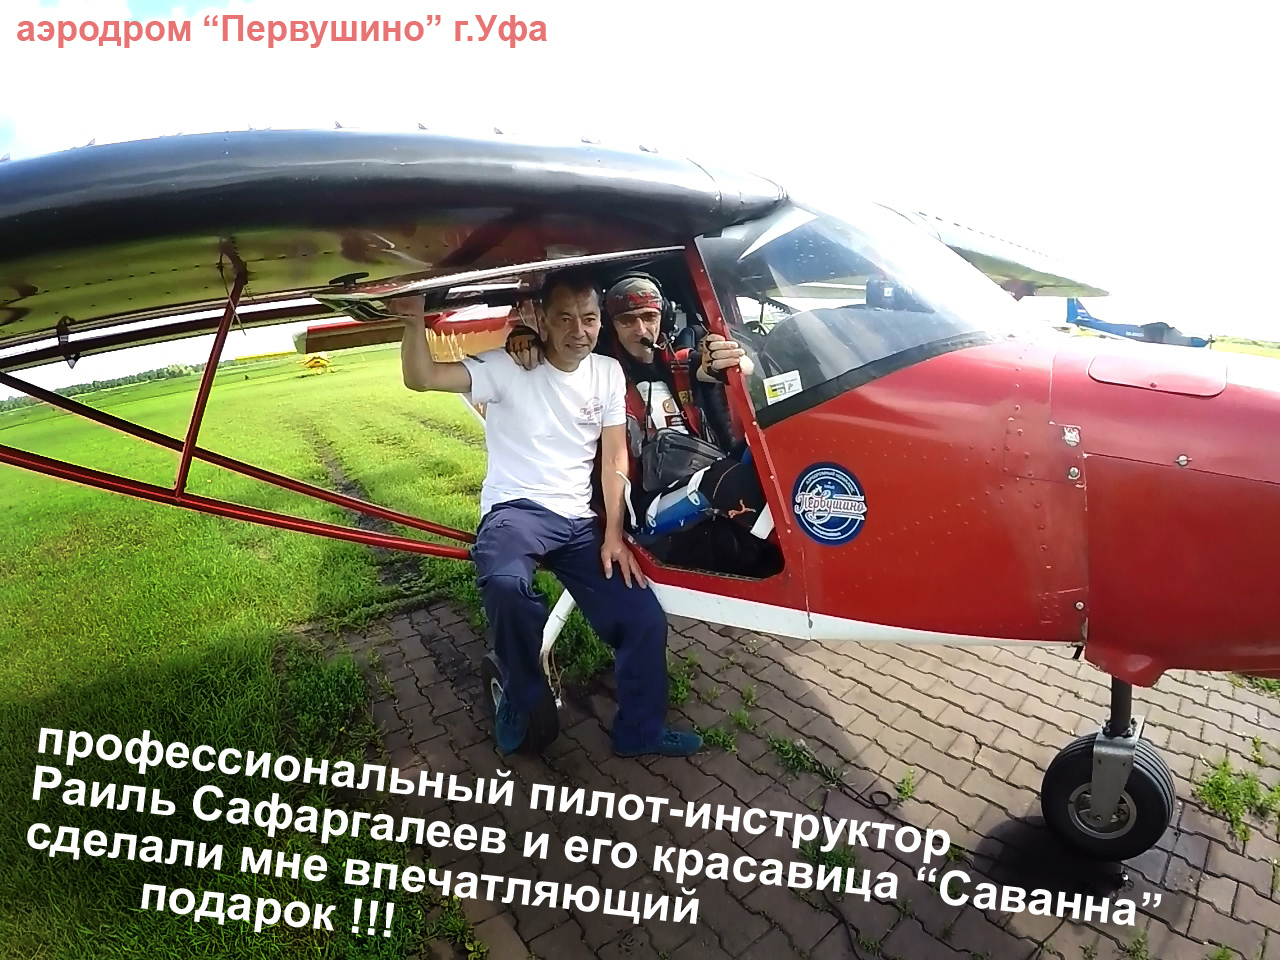 I'm always being carried somewhere... - My, Igor Skikevich, Disabled person, Dream, Pervushino, The first flight, Savannah, Airplane, Ufa, The airport, Tourism, Flight, Aviation, Longpost, 